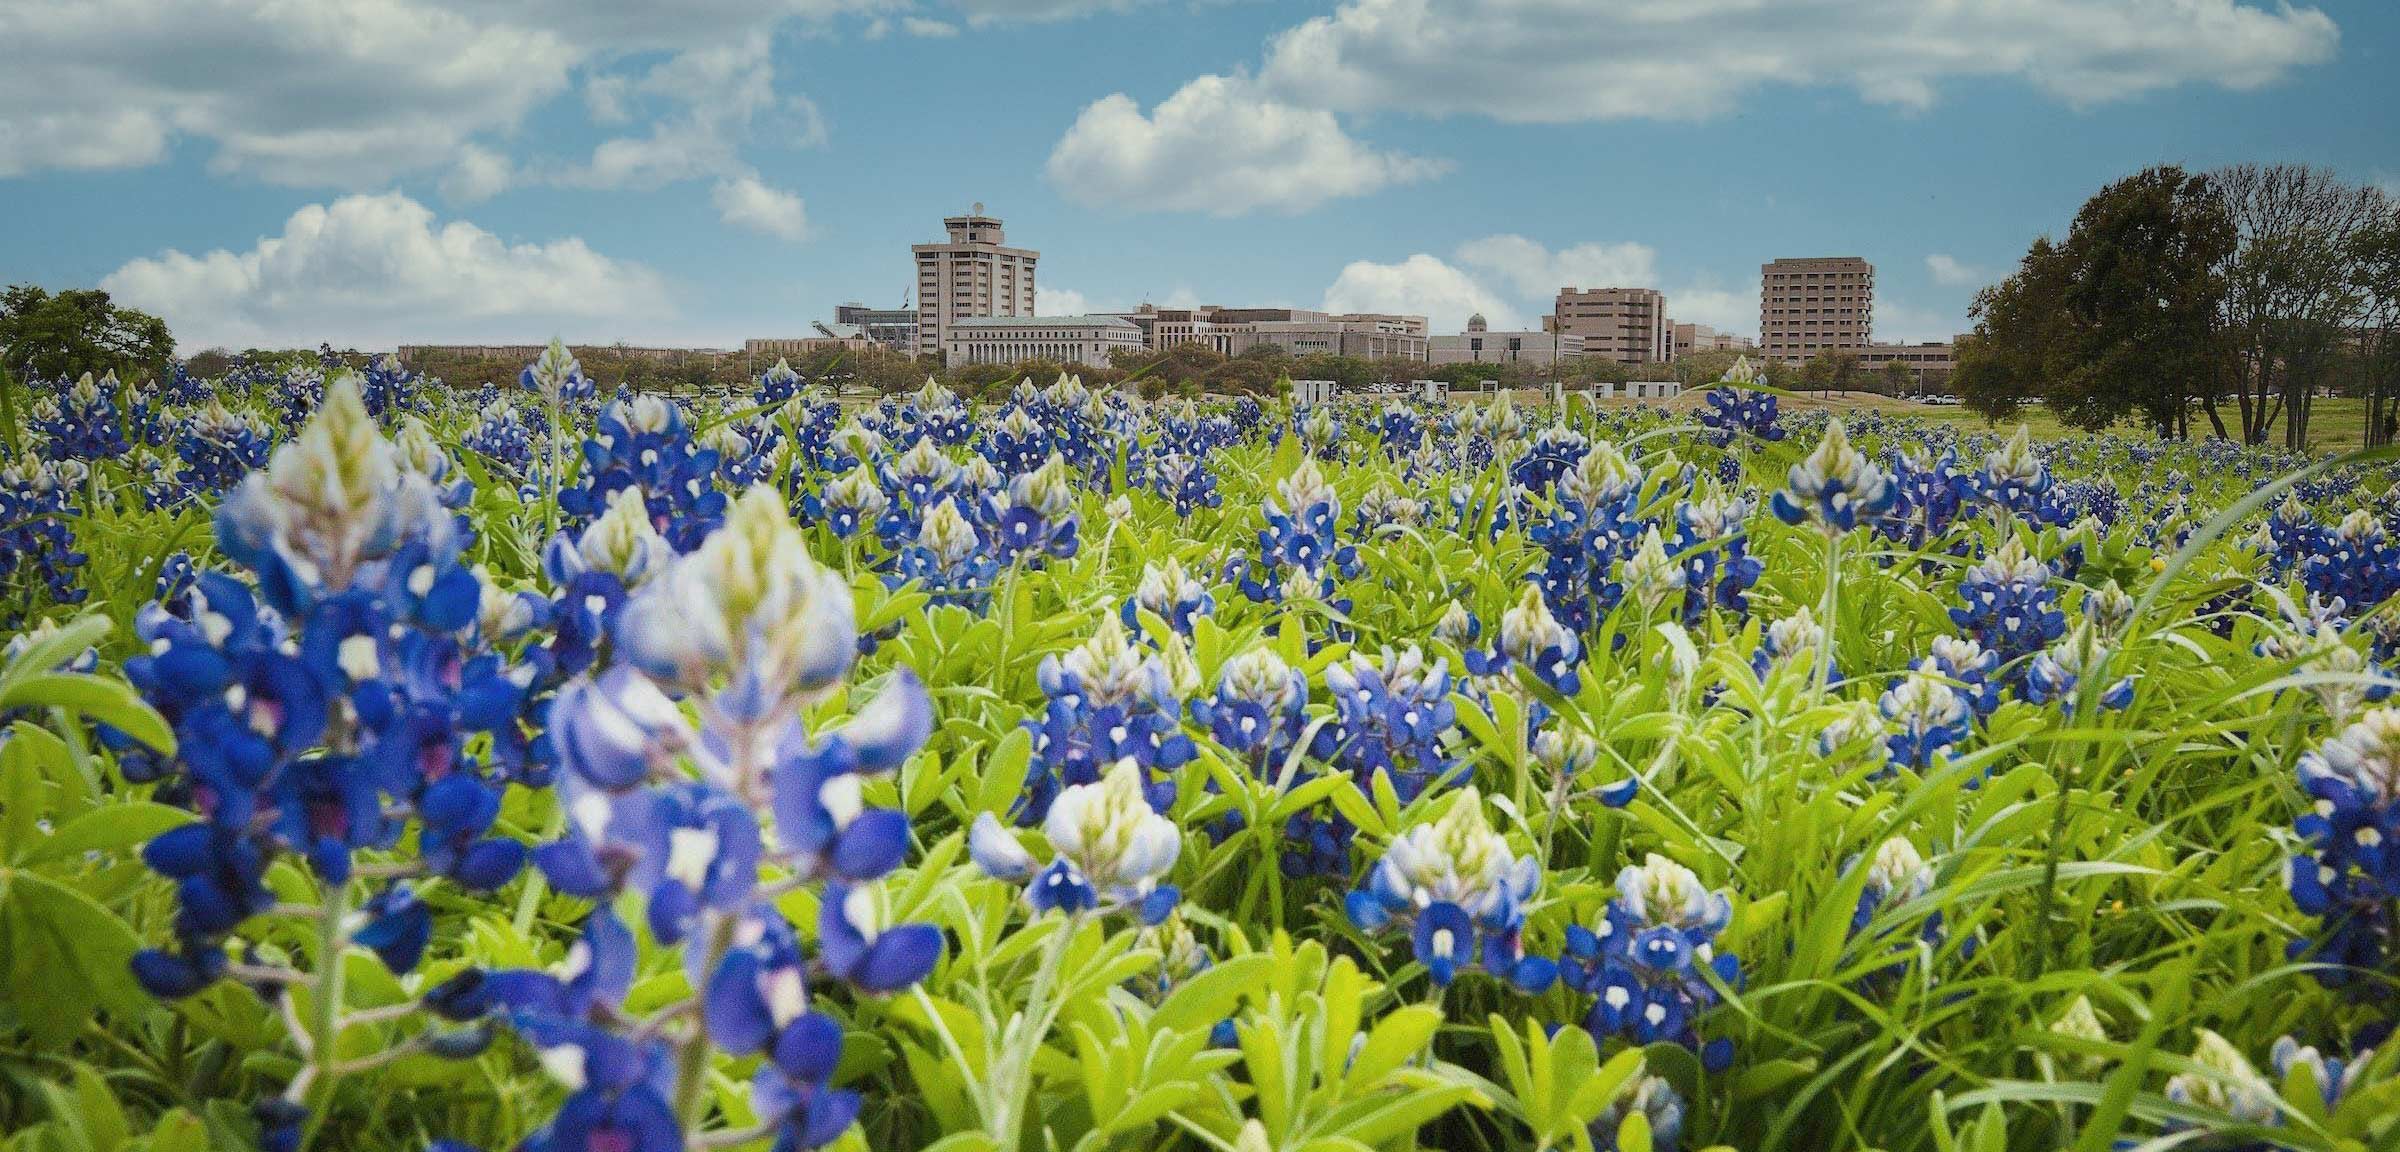 Bluebonnets in front of ϲʹ̳ Campus